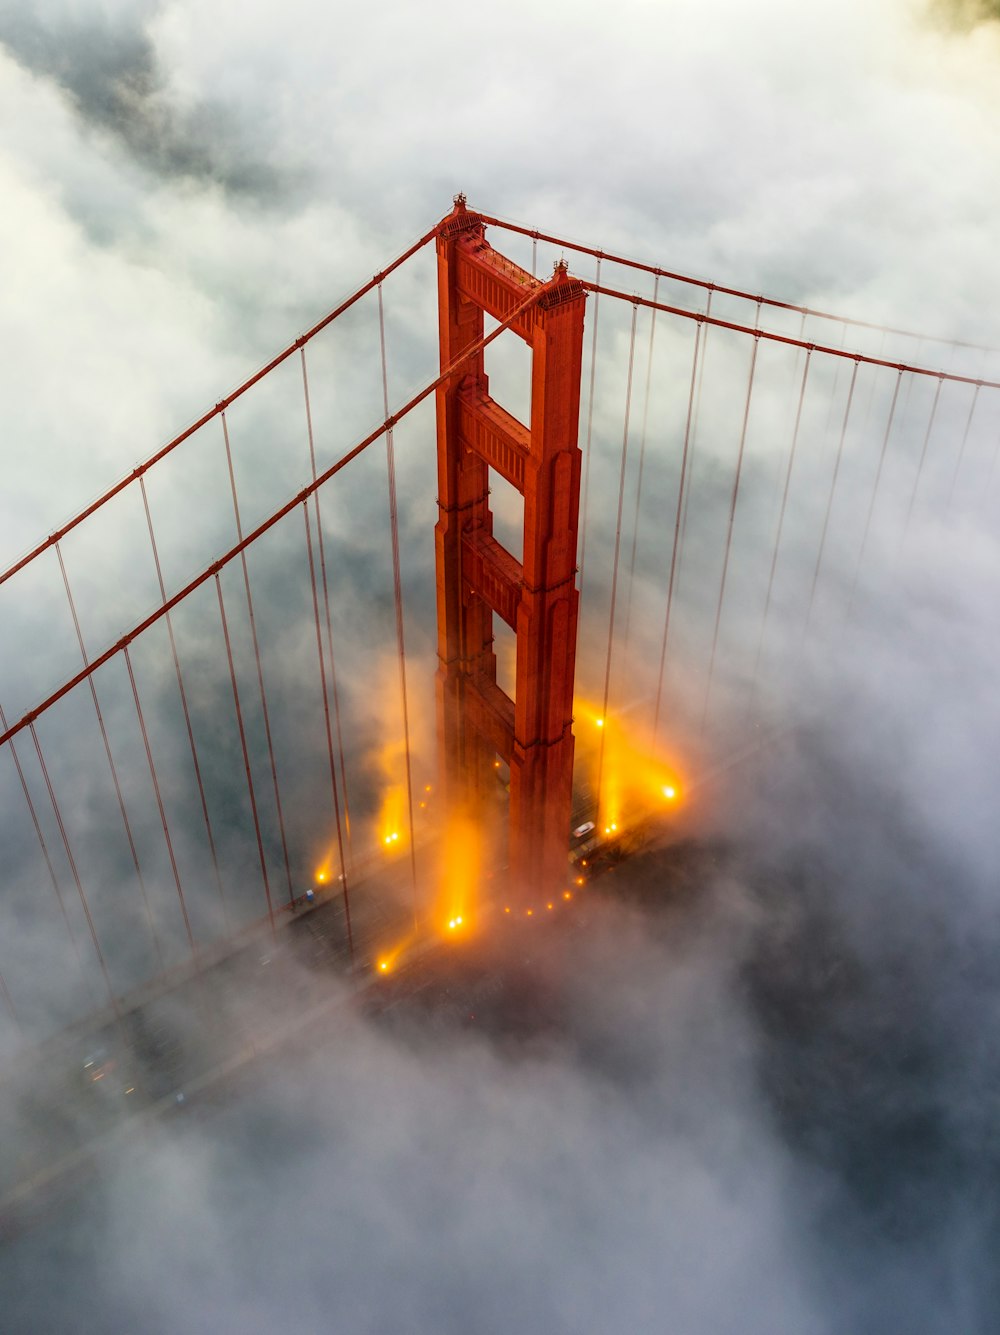 a view of the golden gate bridge from above the clouds